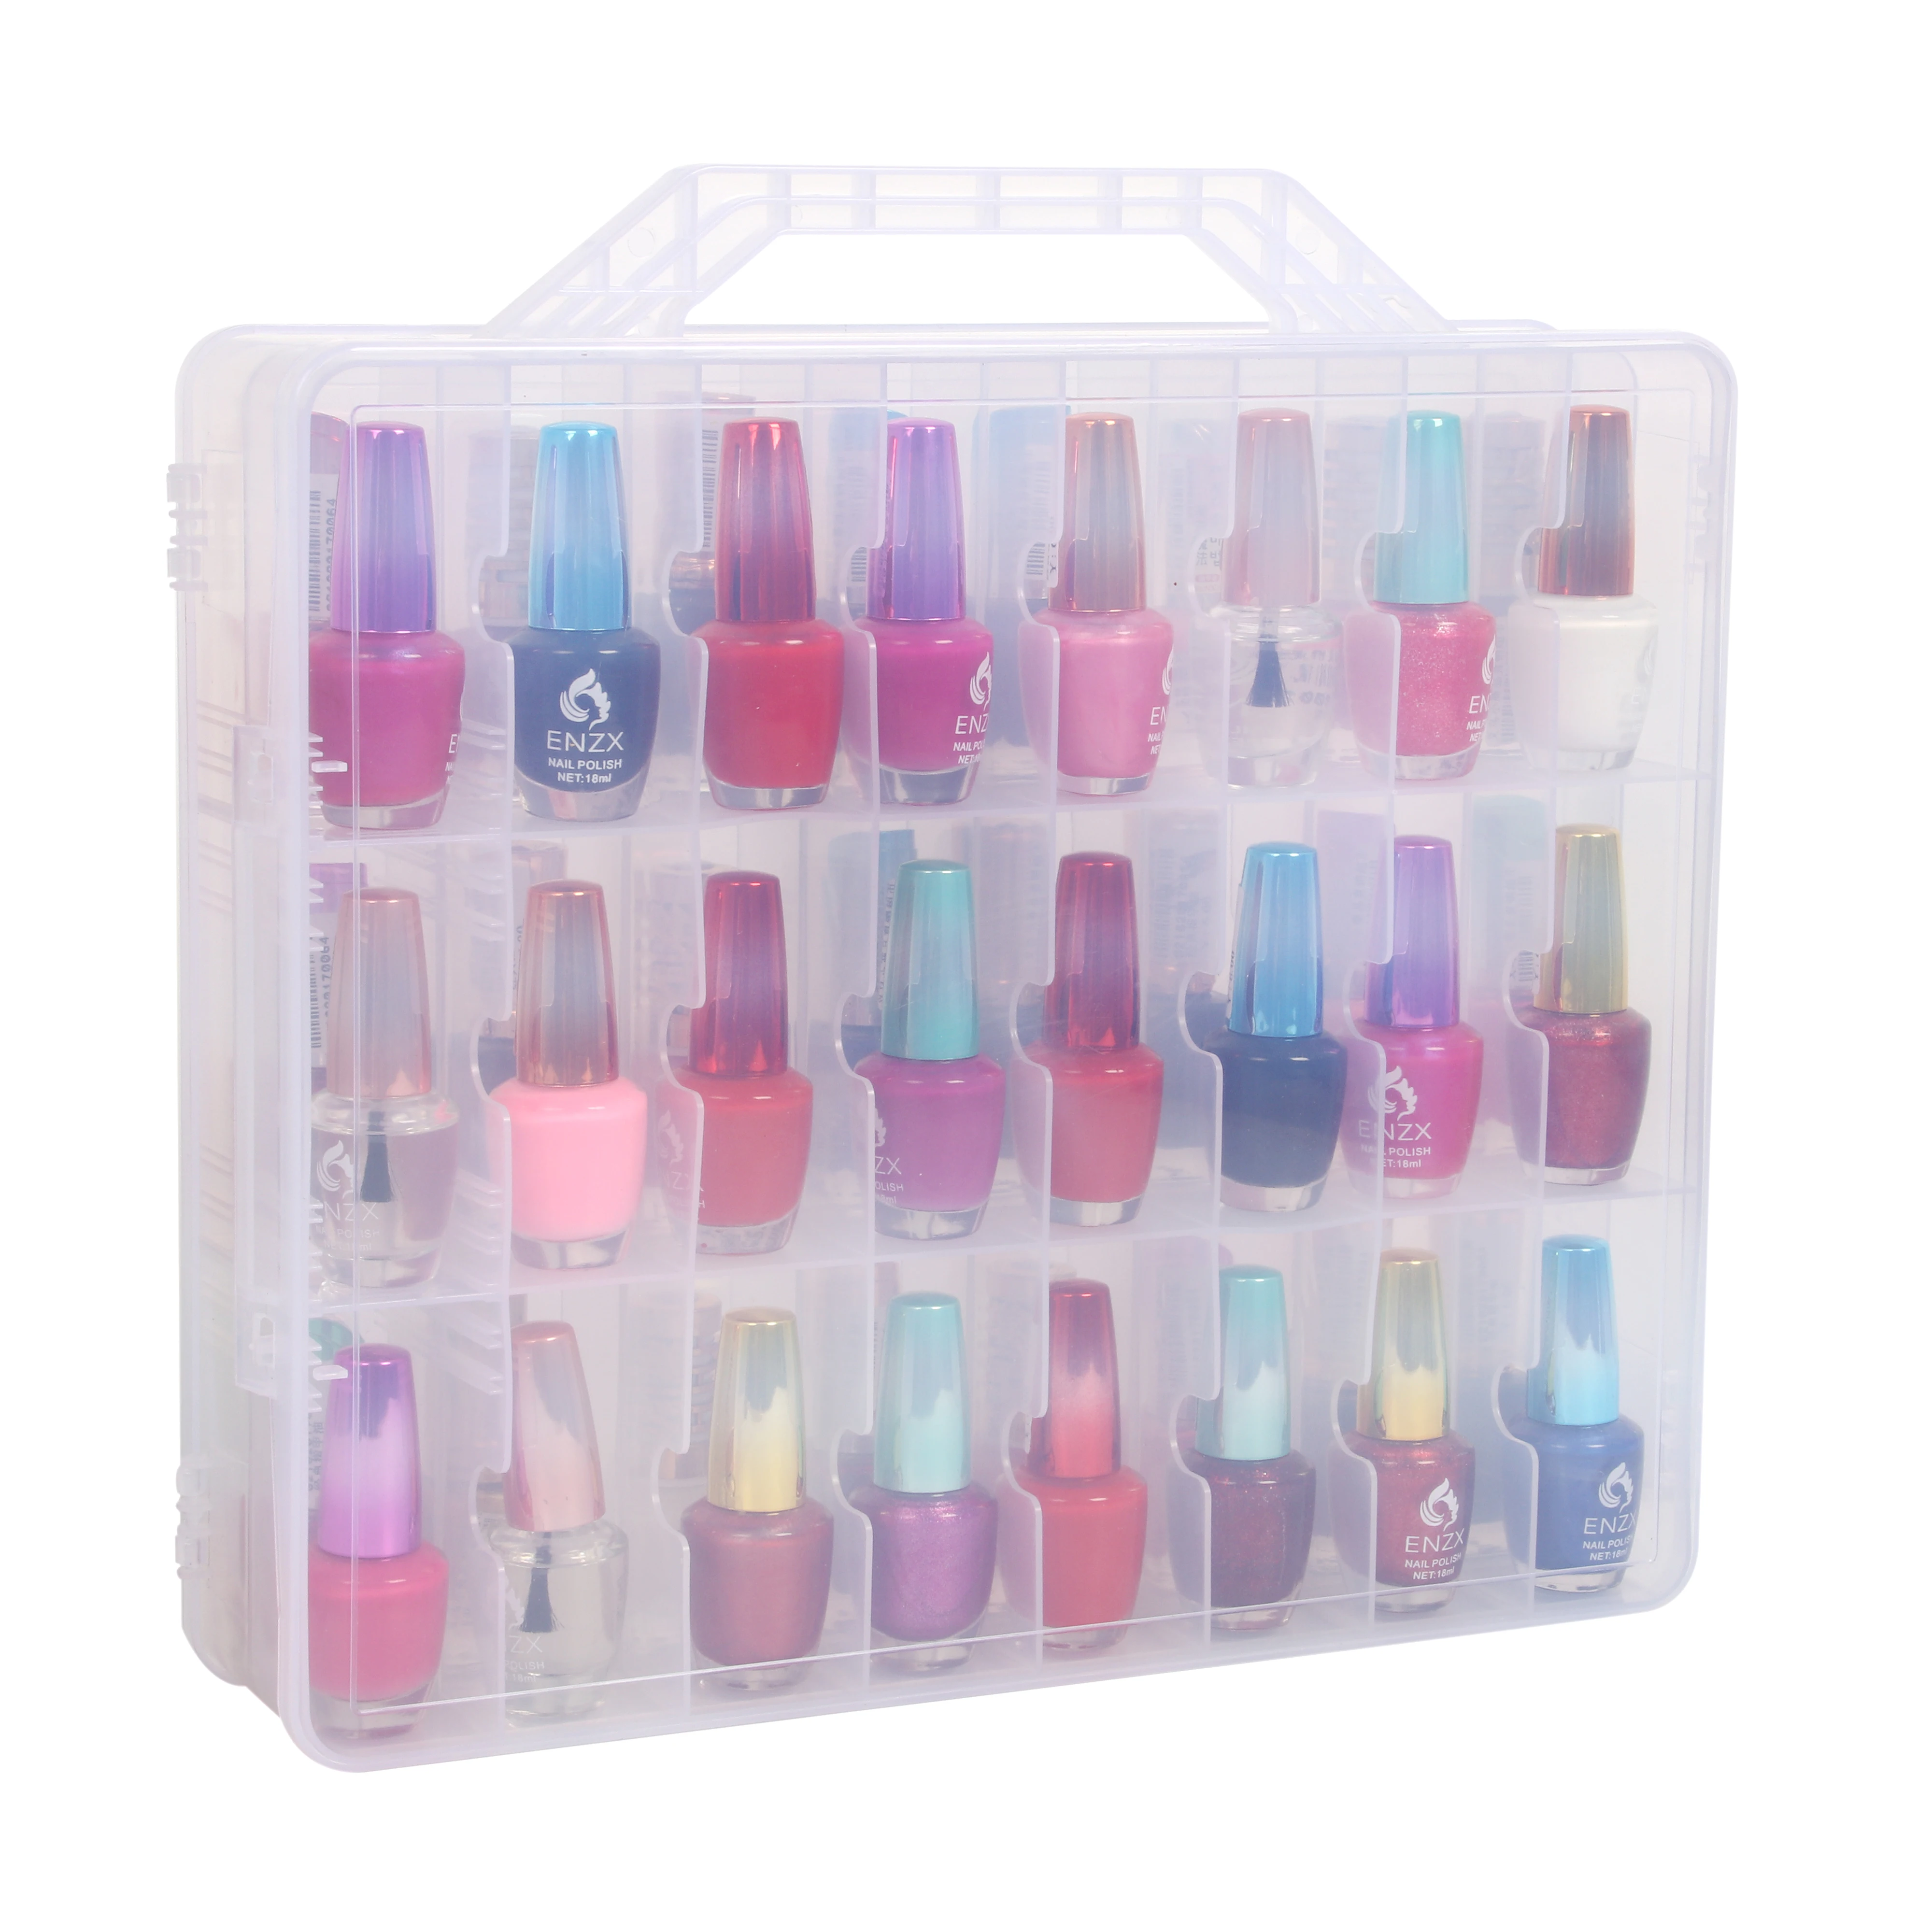 Luxja Nail Polish Carrying Case - Holds 20 Bottles (15ml - 0.5 fl.oz) or 30  Bottles (7ml - 0.27 fl.oz), Portable Organizer Bag for Nail Polish and  Manicure Set, Black : Amazon.in: Beauty